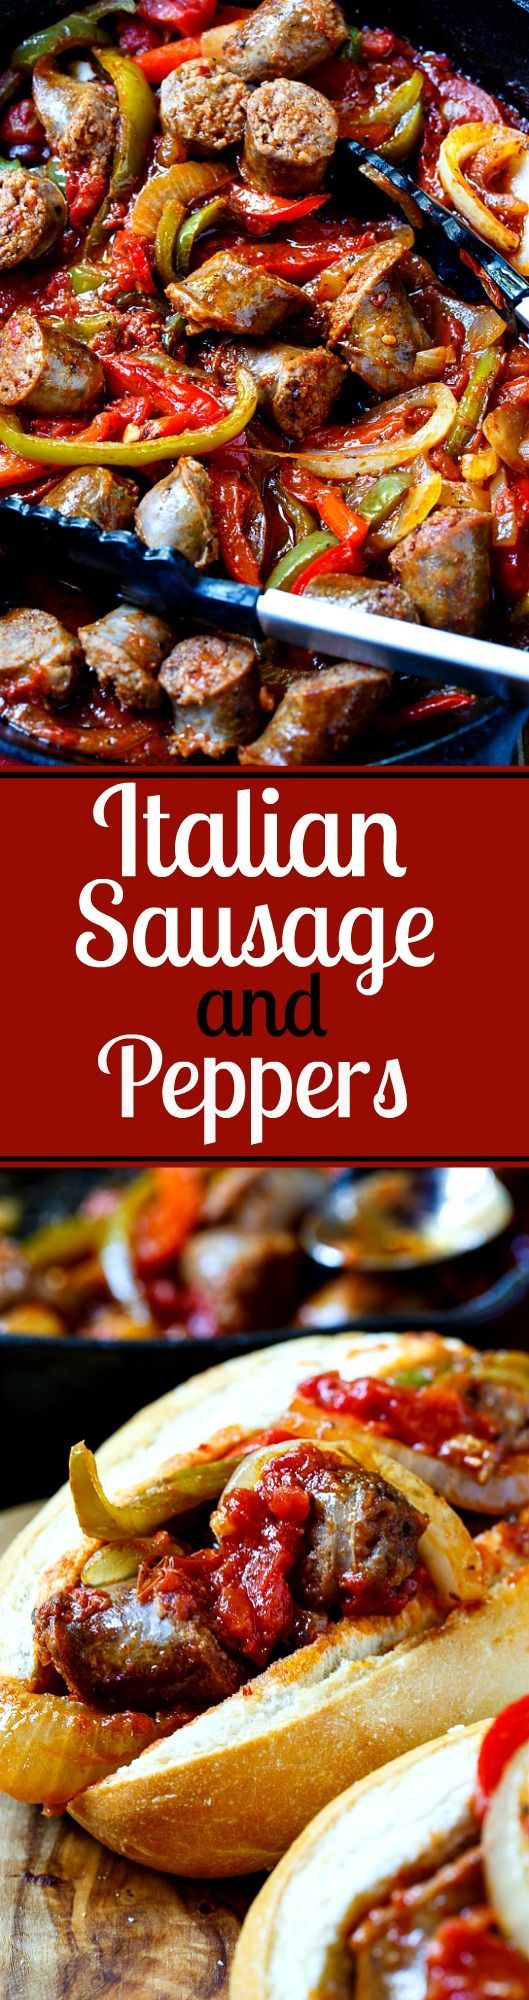 Italian Sausage and Peppers makes an easy weeknight meal!